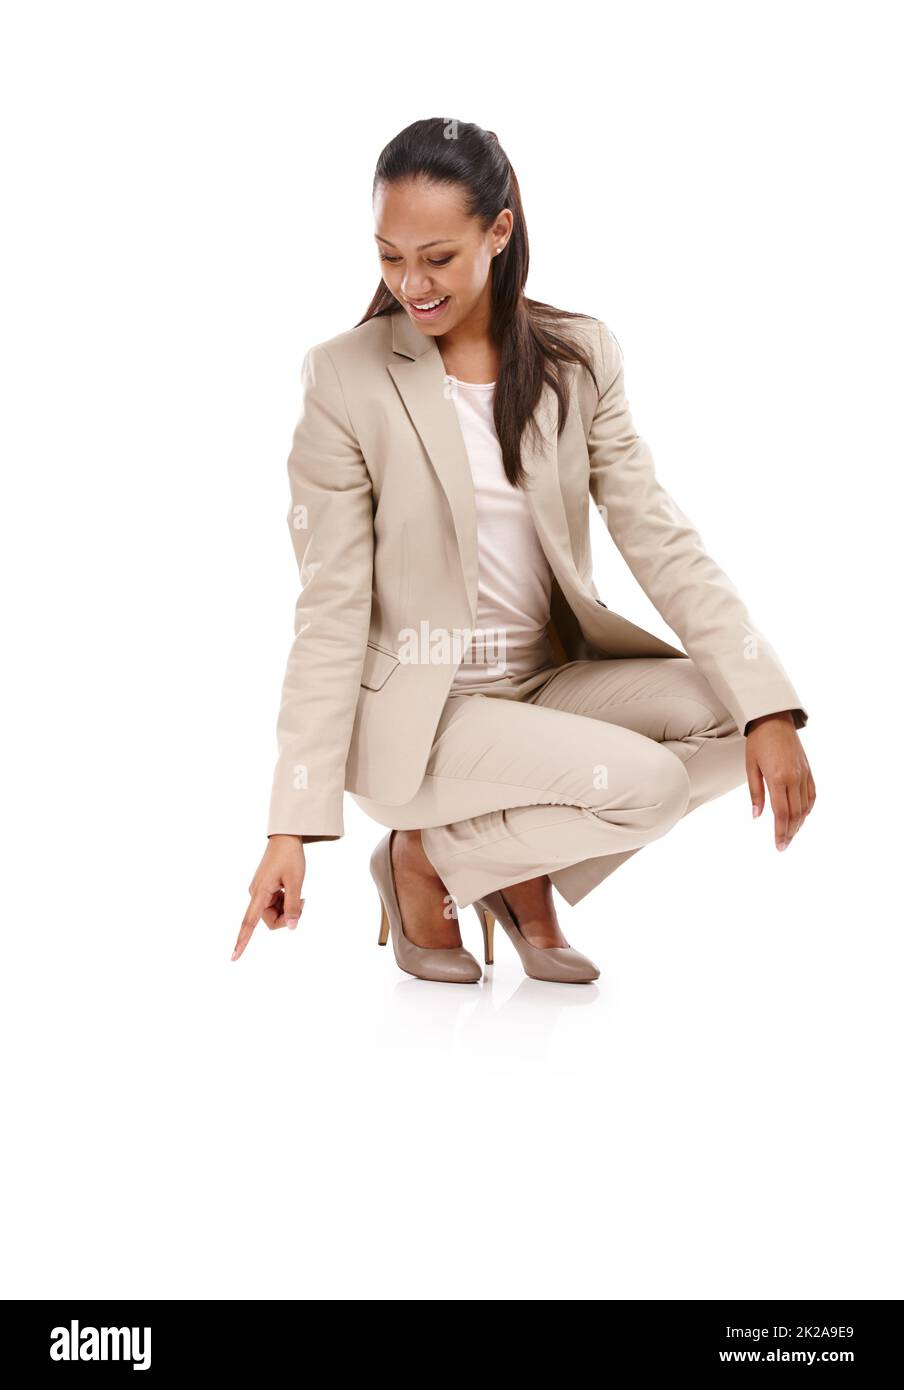 Nowhere to go but up. Full length shot of an attractive young woman in a suit crouching down and pointing towards the ground isolated on white. Stock Photo